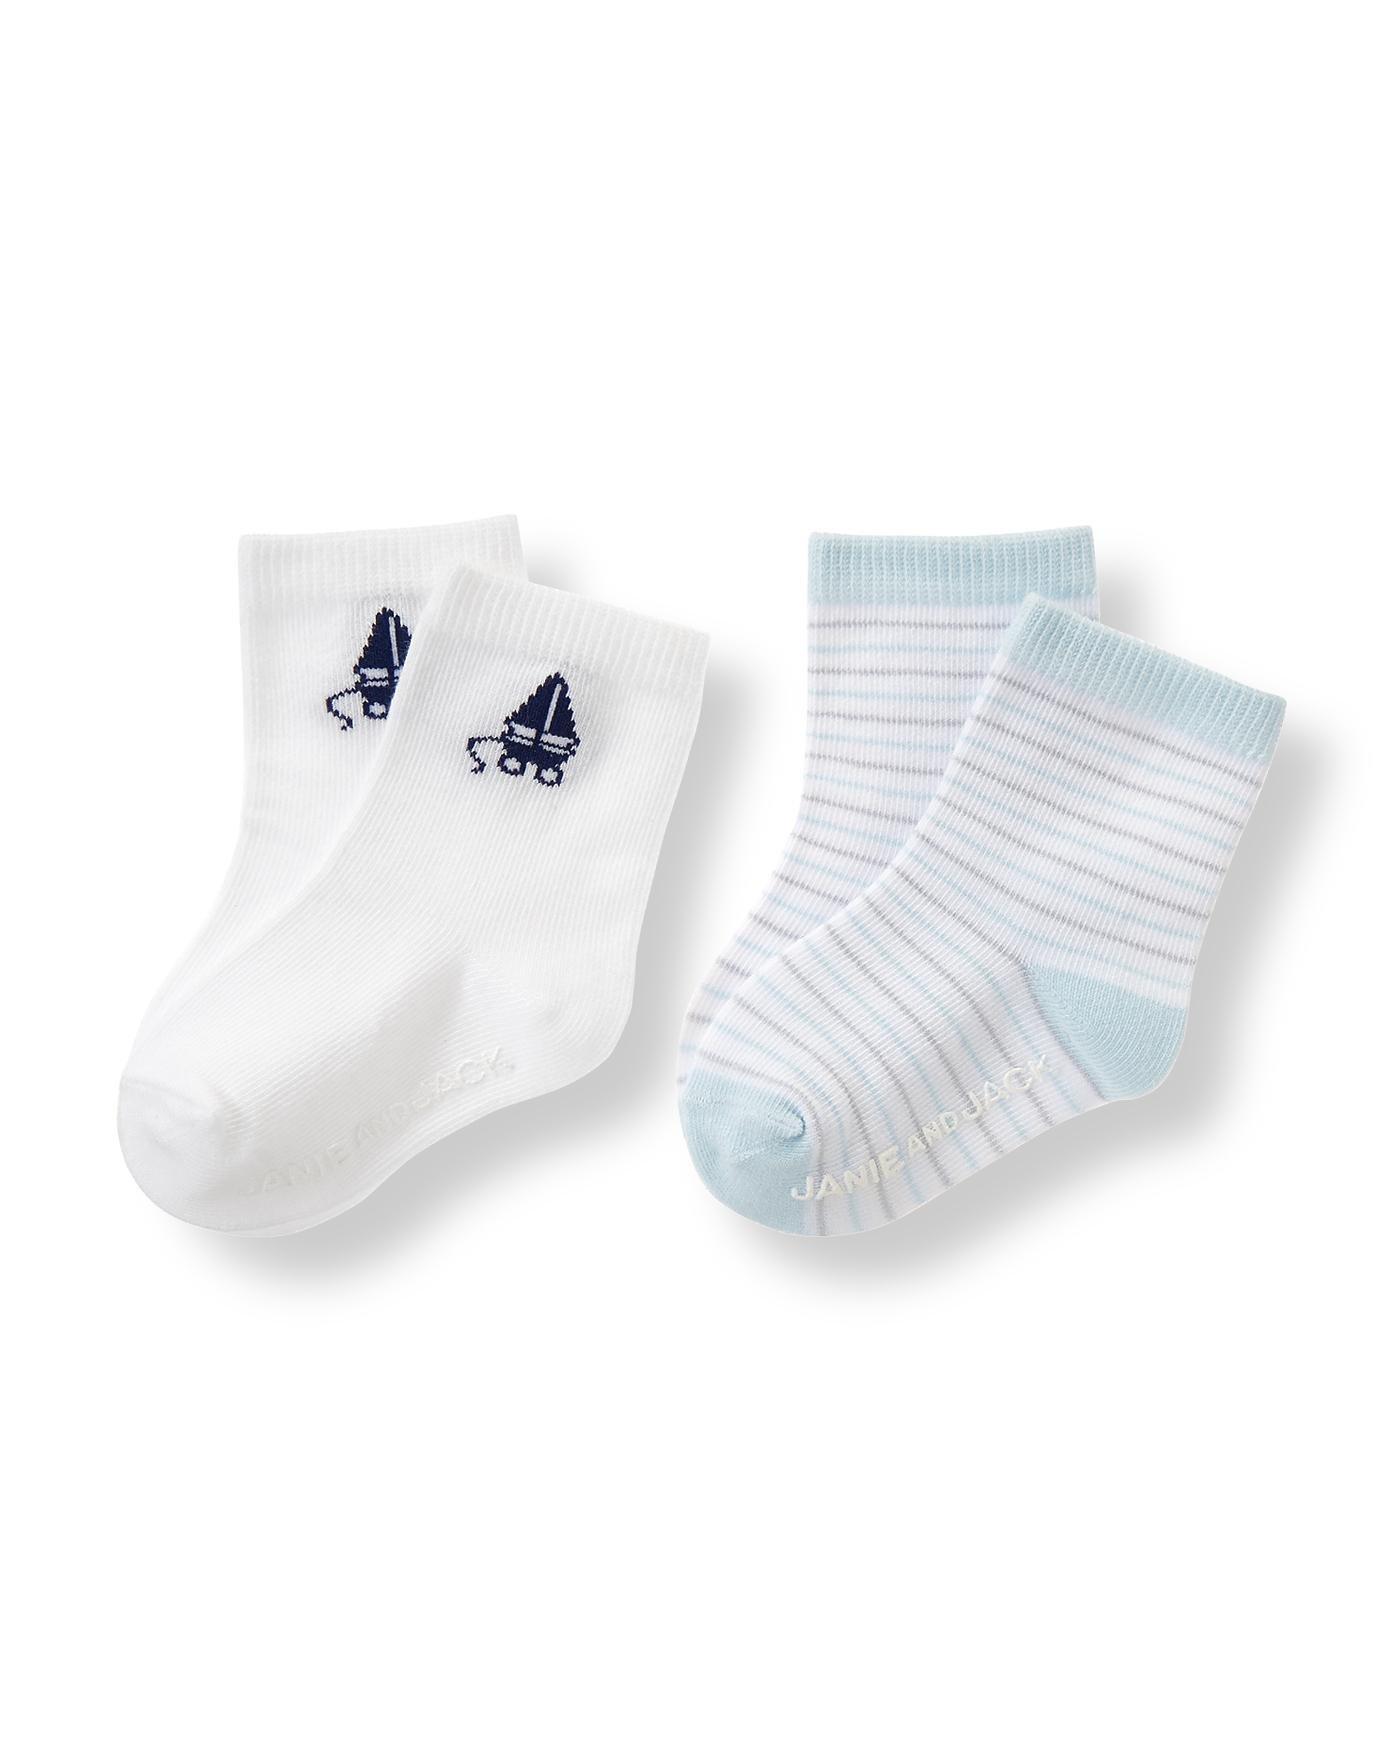 Striped Toy Sailboat Sock Two-Pack image number 0